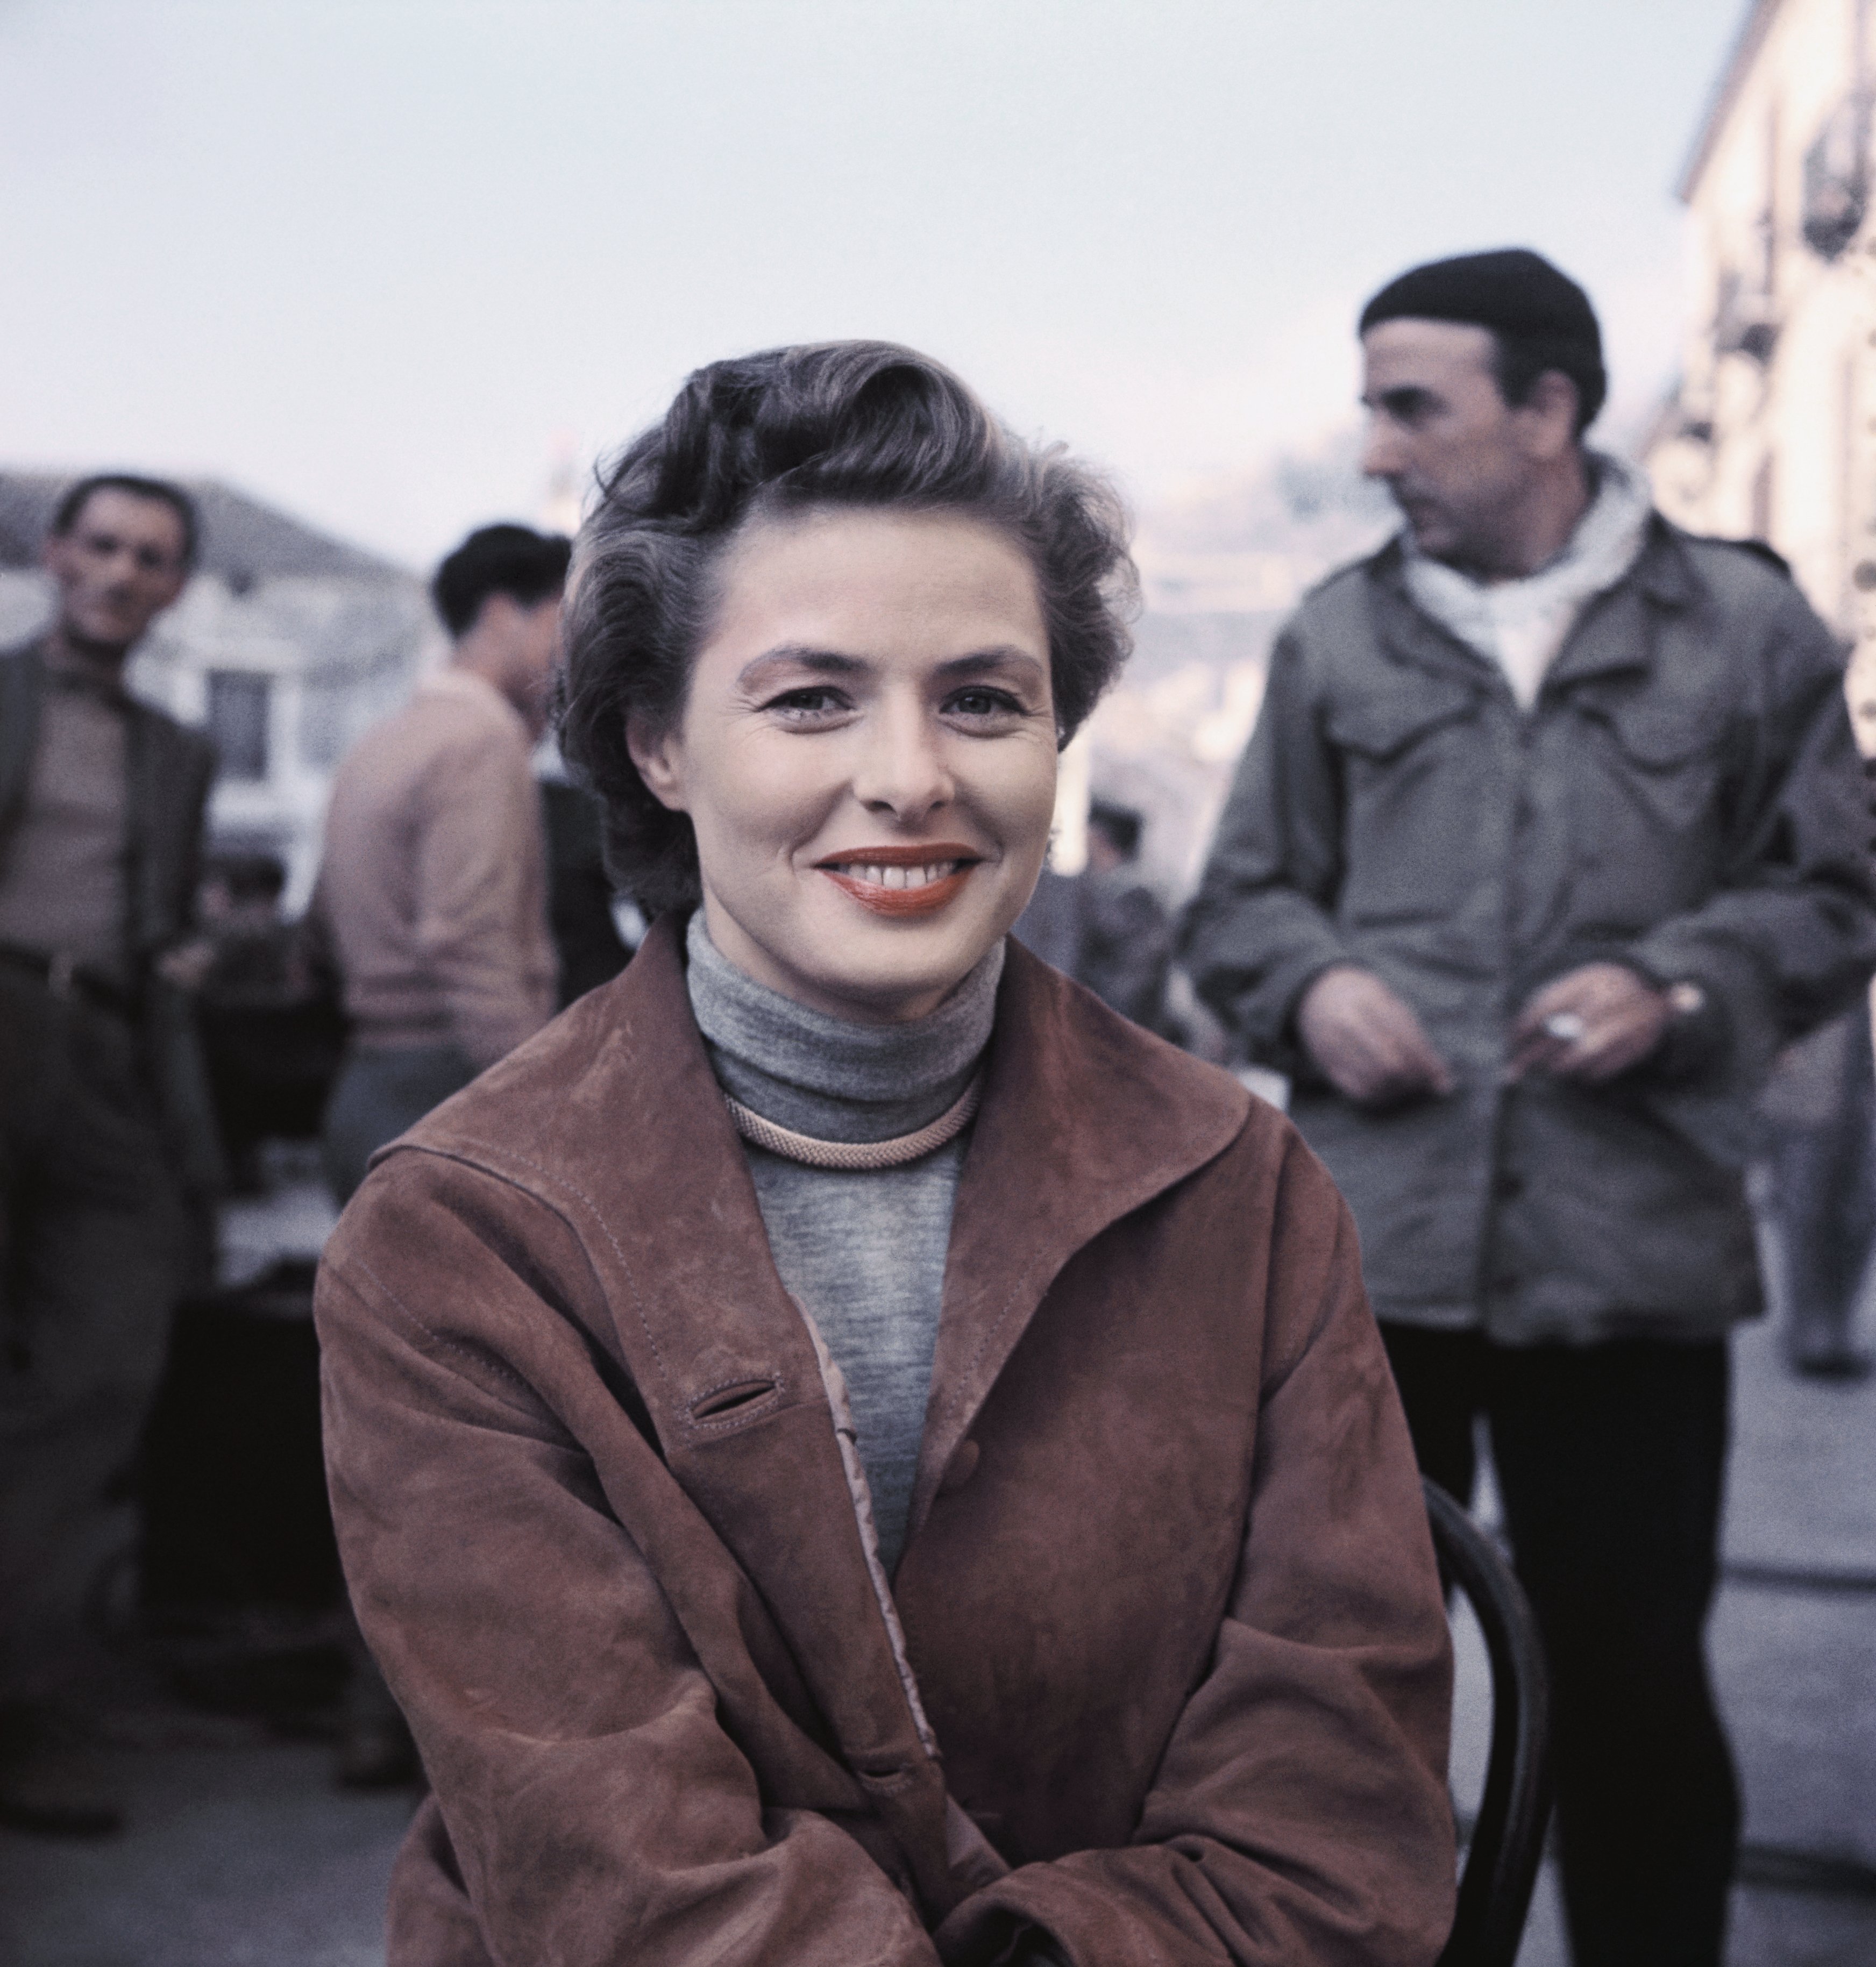 Actress Ingrid Bergman on the set on "Journey to Italy" directed by her husband Roberto Rossellini in Naples Italy in 1954 | Source: Getty Images